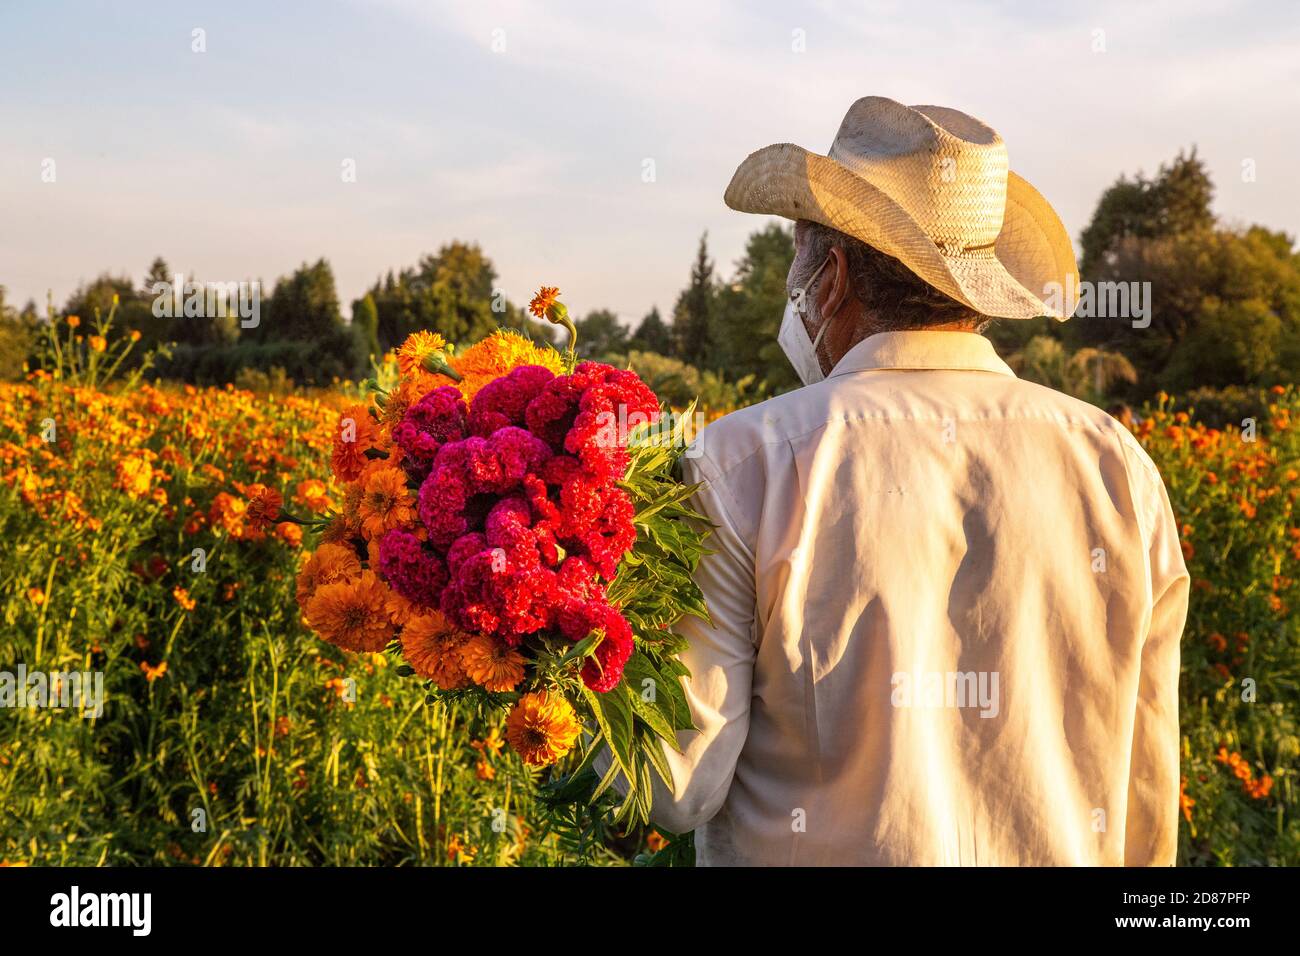 Mexican farmer carrying orange and cherry cempasuchil flowers Stock Photo